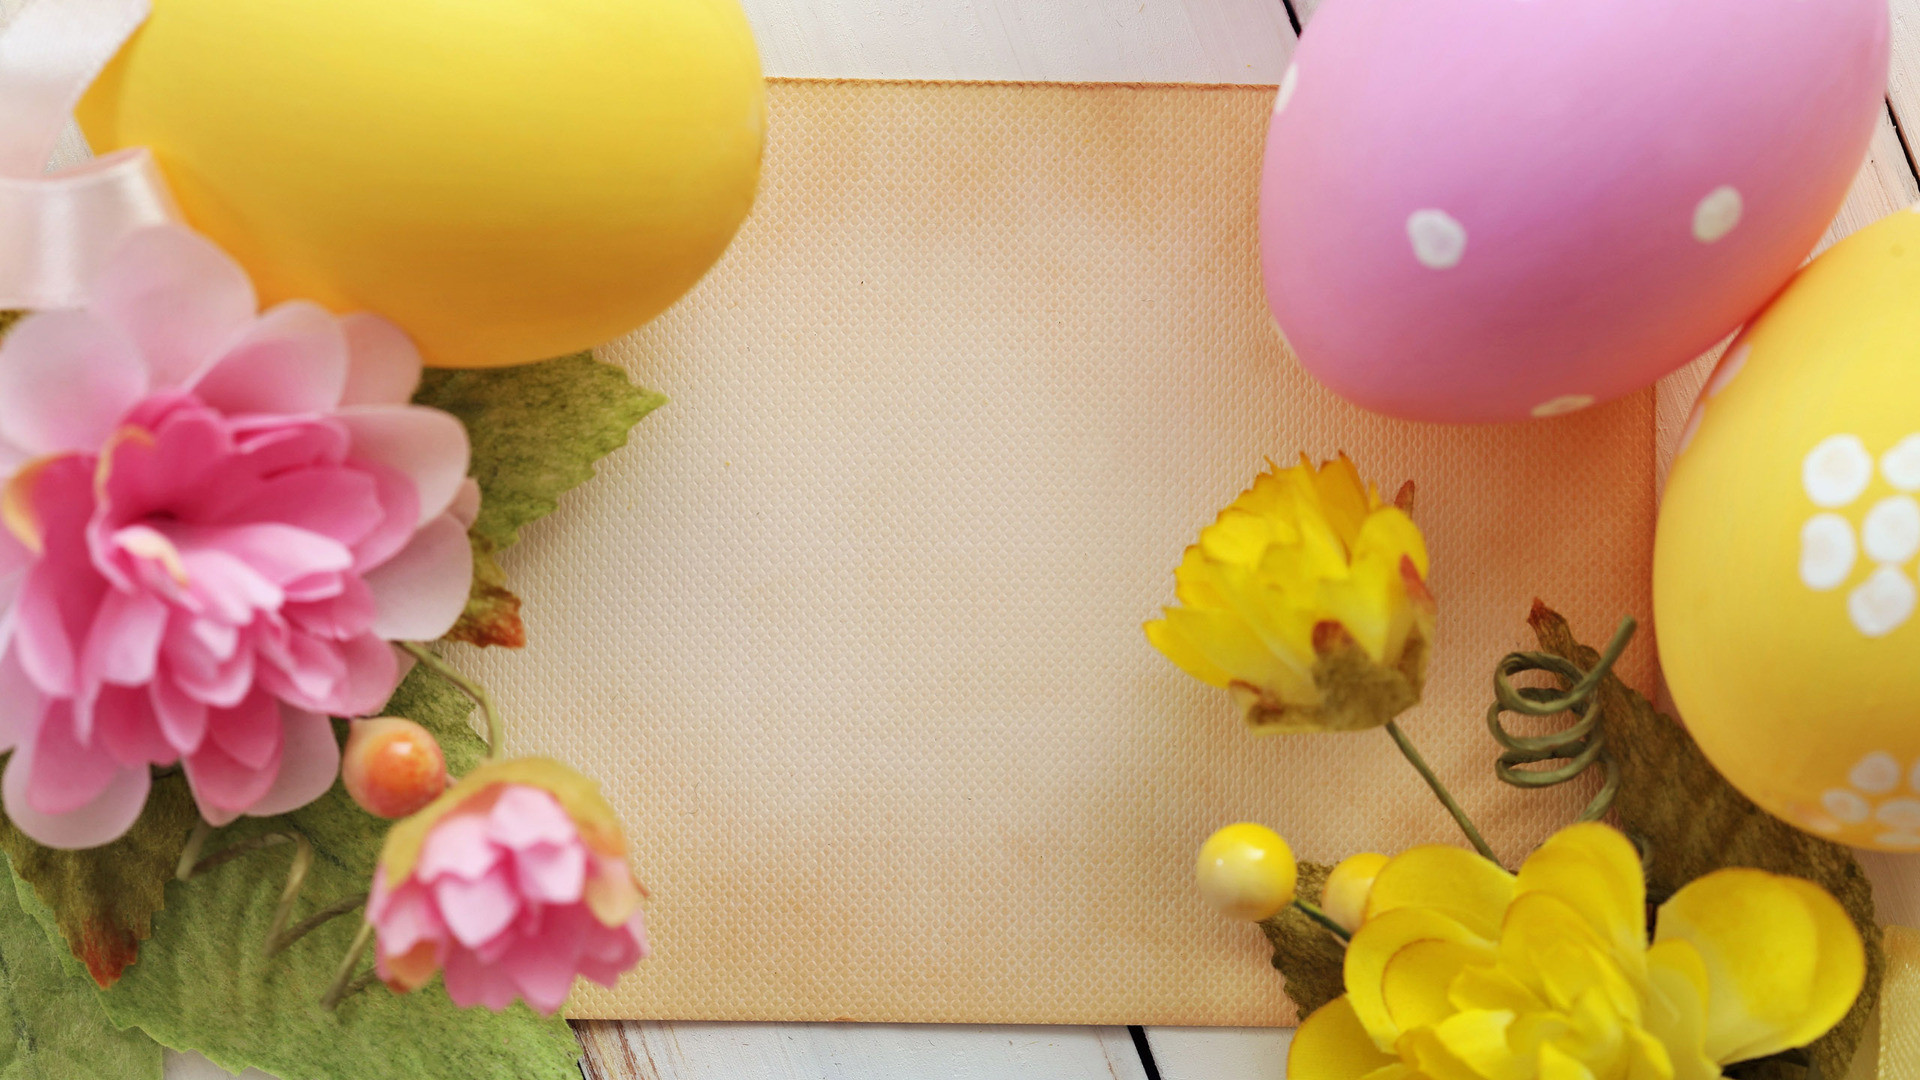 Easter eggs and flowers Wallpaper